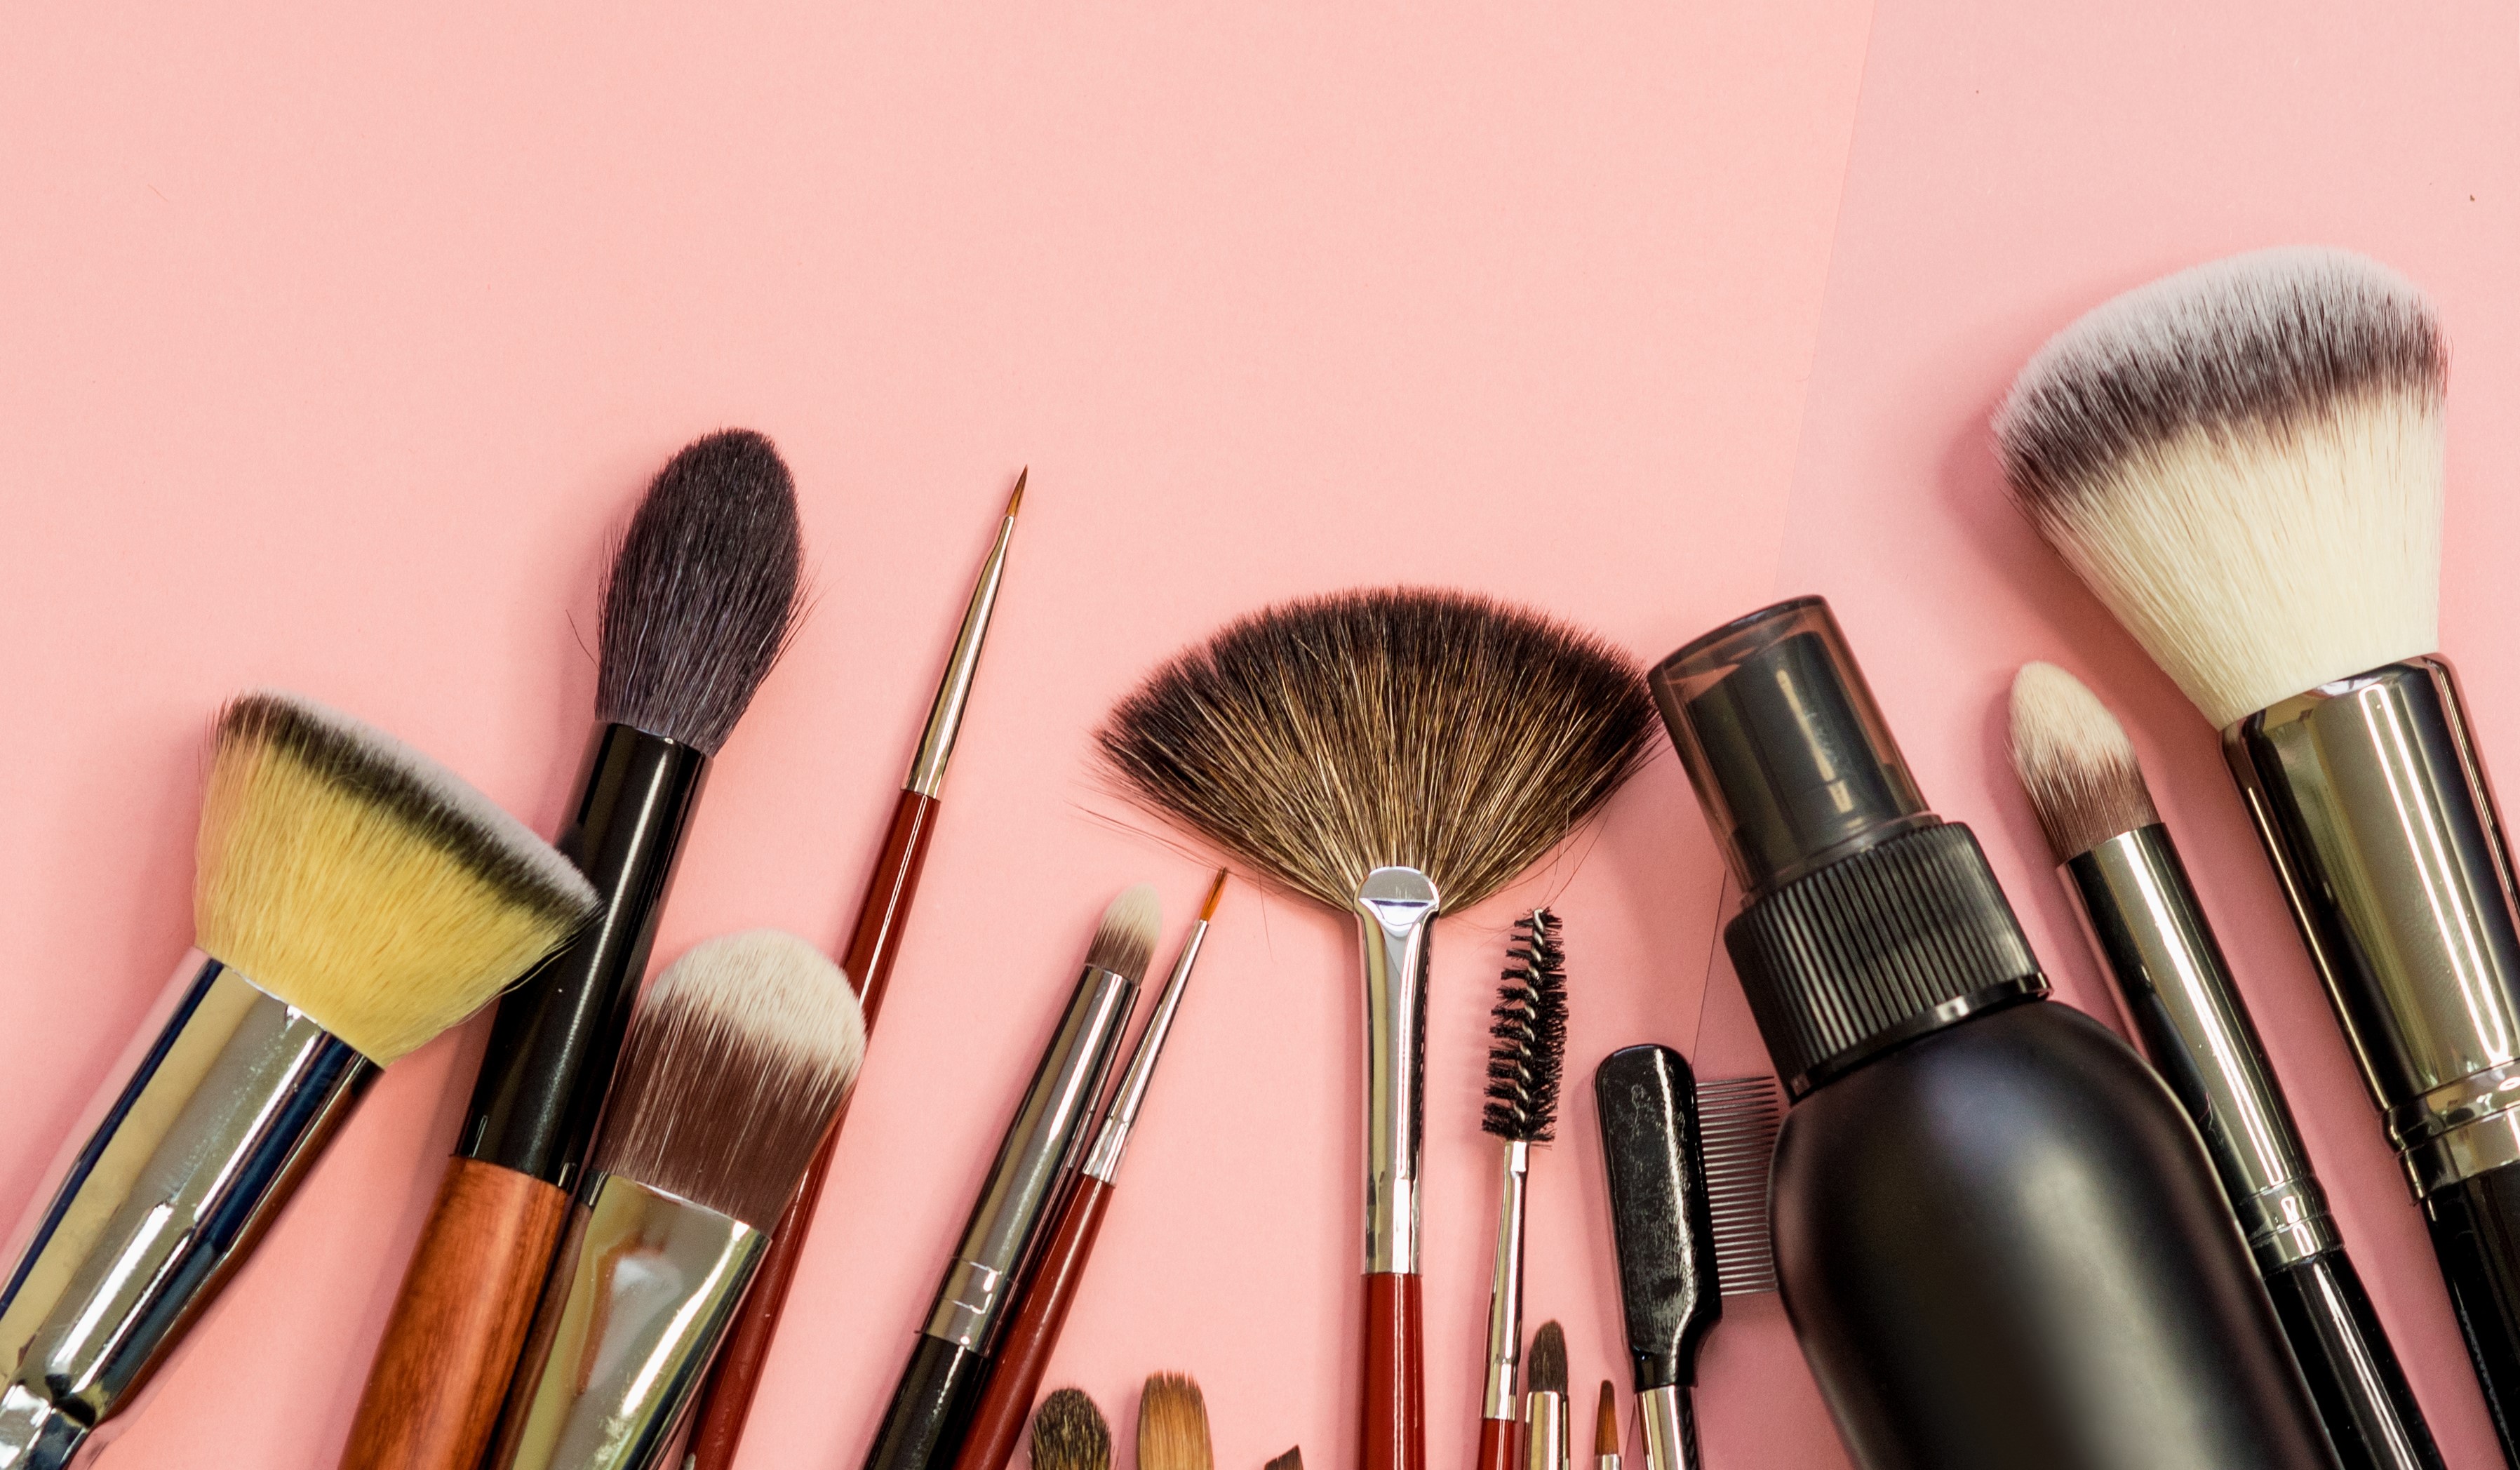 How To Clean, Sanitize And Condition Makeup Brushes